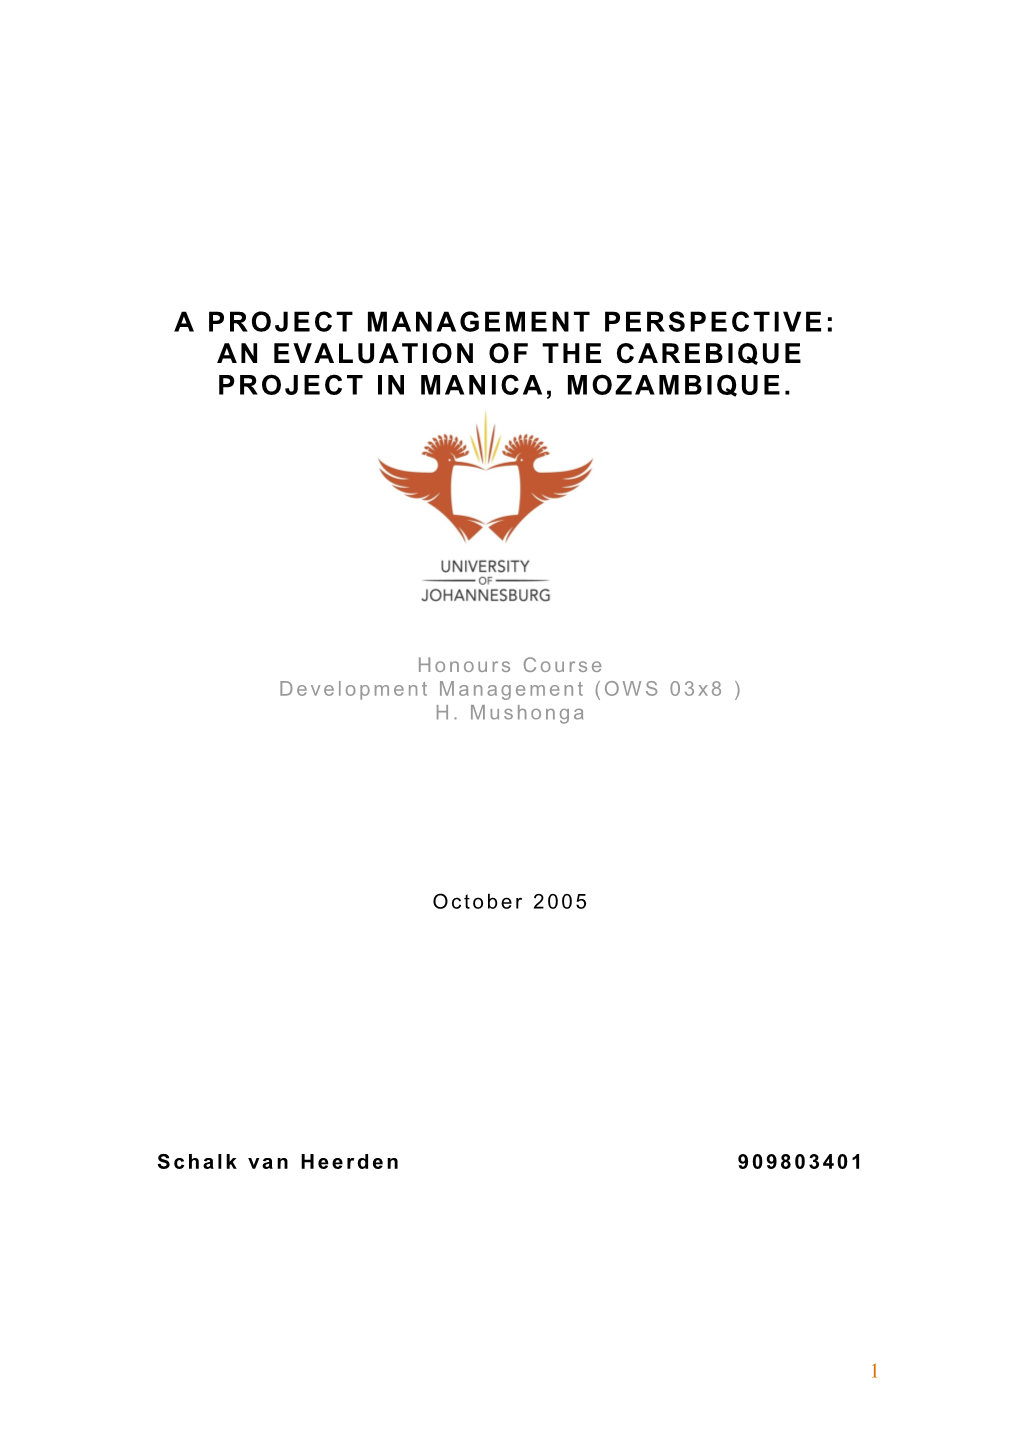 An Evaluation of the Carebique Project in Manica, Mozambique